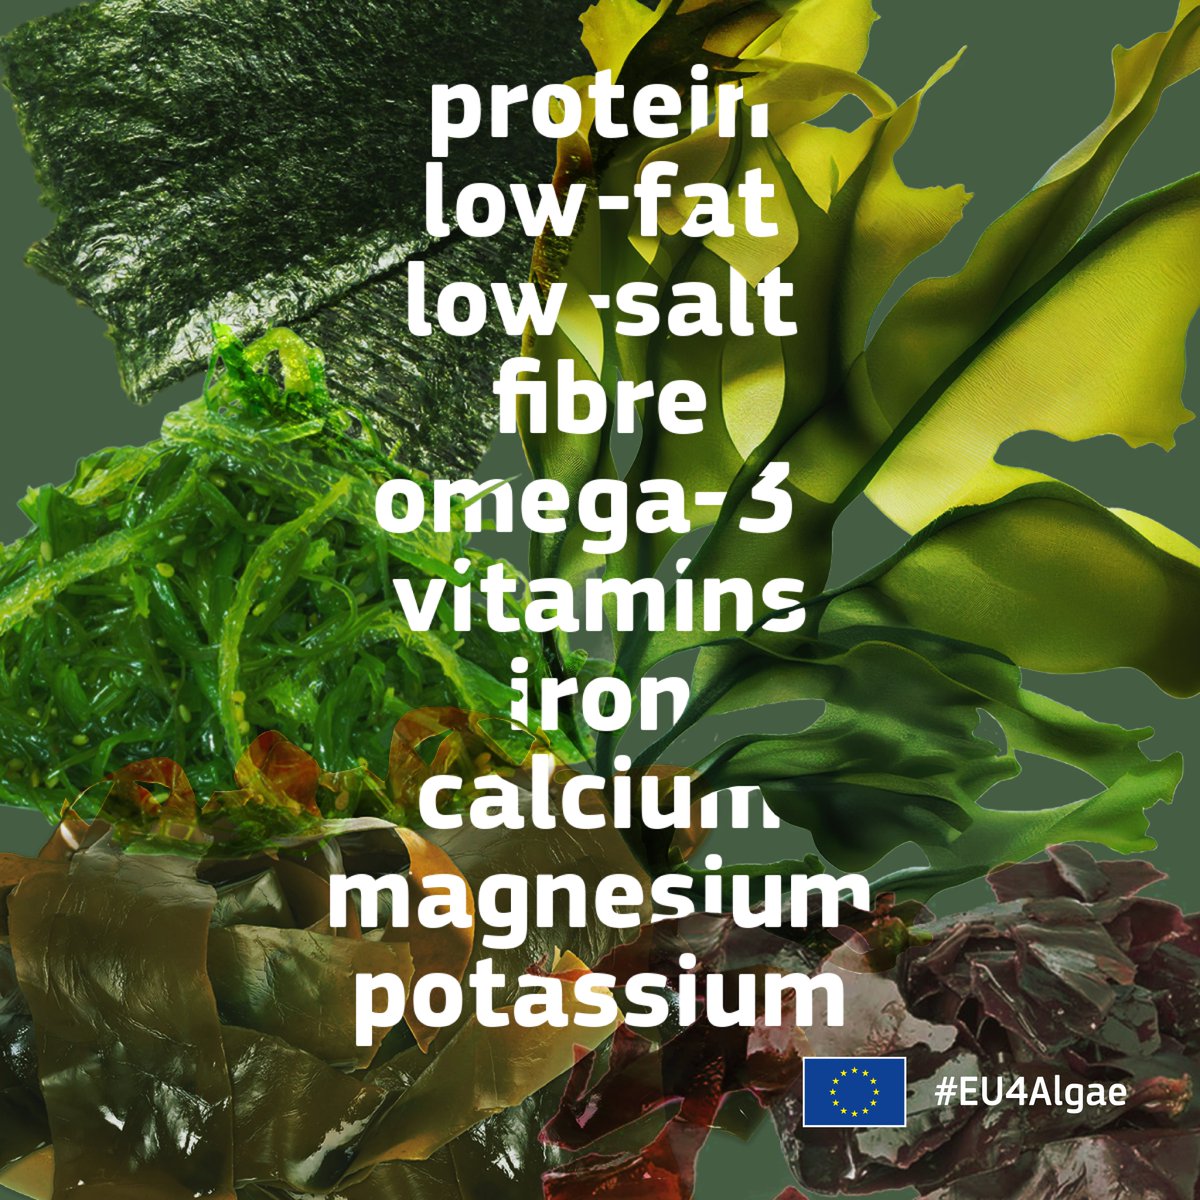 Did you know that algae are a nutritional powerhouse? Explore the vitamins, minerals, and antioxidants packed into these oceanic superfoods, and start reaping the health benefits today! 🌊🌱 #EU4Algae #EMFAF